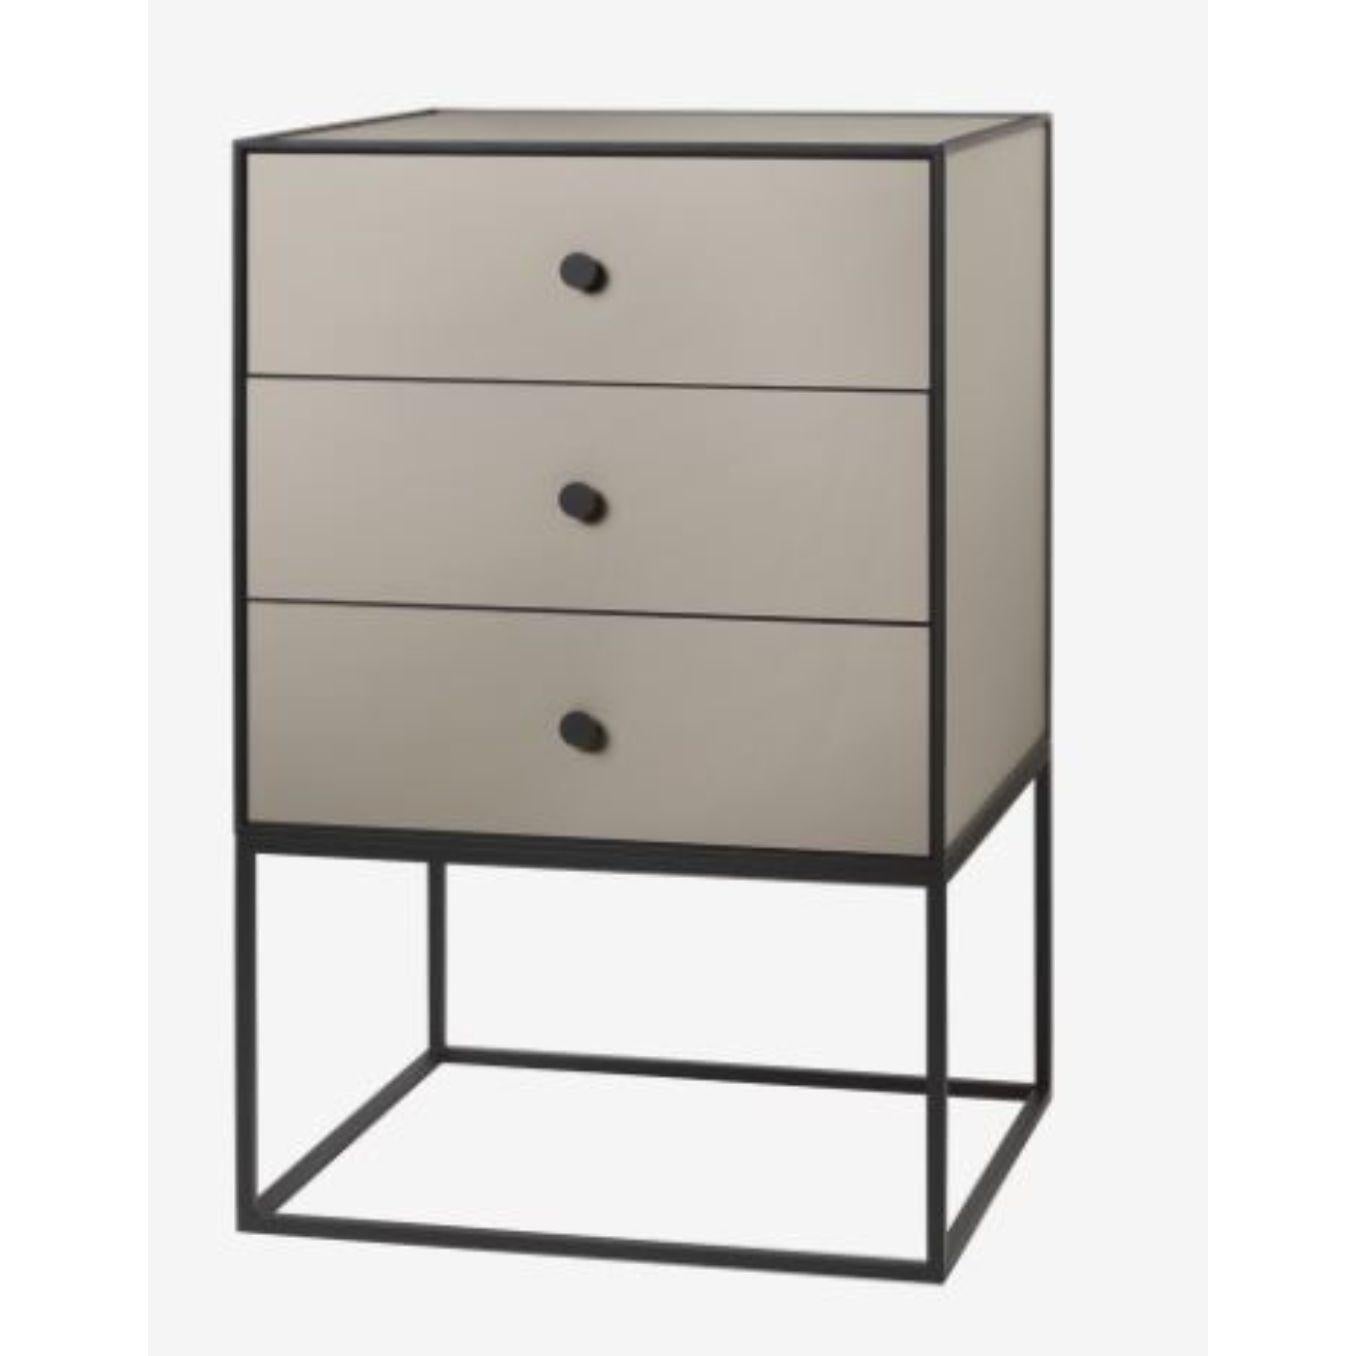 49 sand frame sideboard with 3 drawers by Lassen
Dimensions: D 49 x W 42 x H 77 cm 
Materials: Finér, melamin, melamine, metal, veneer
Also available in different colours and dimensions.
Weight: 21 kg

By Lassen is a Danish design brand